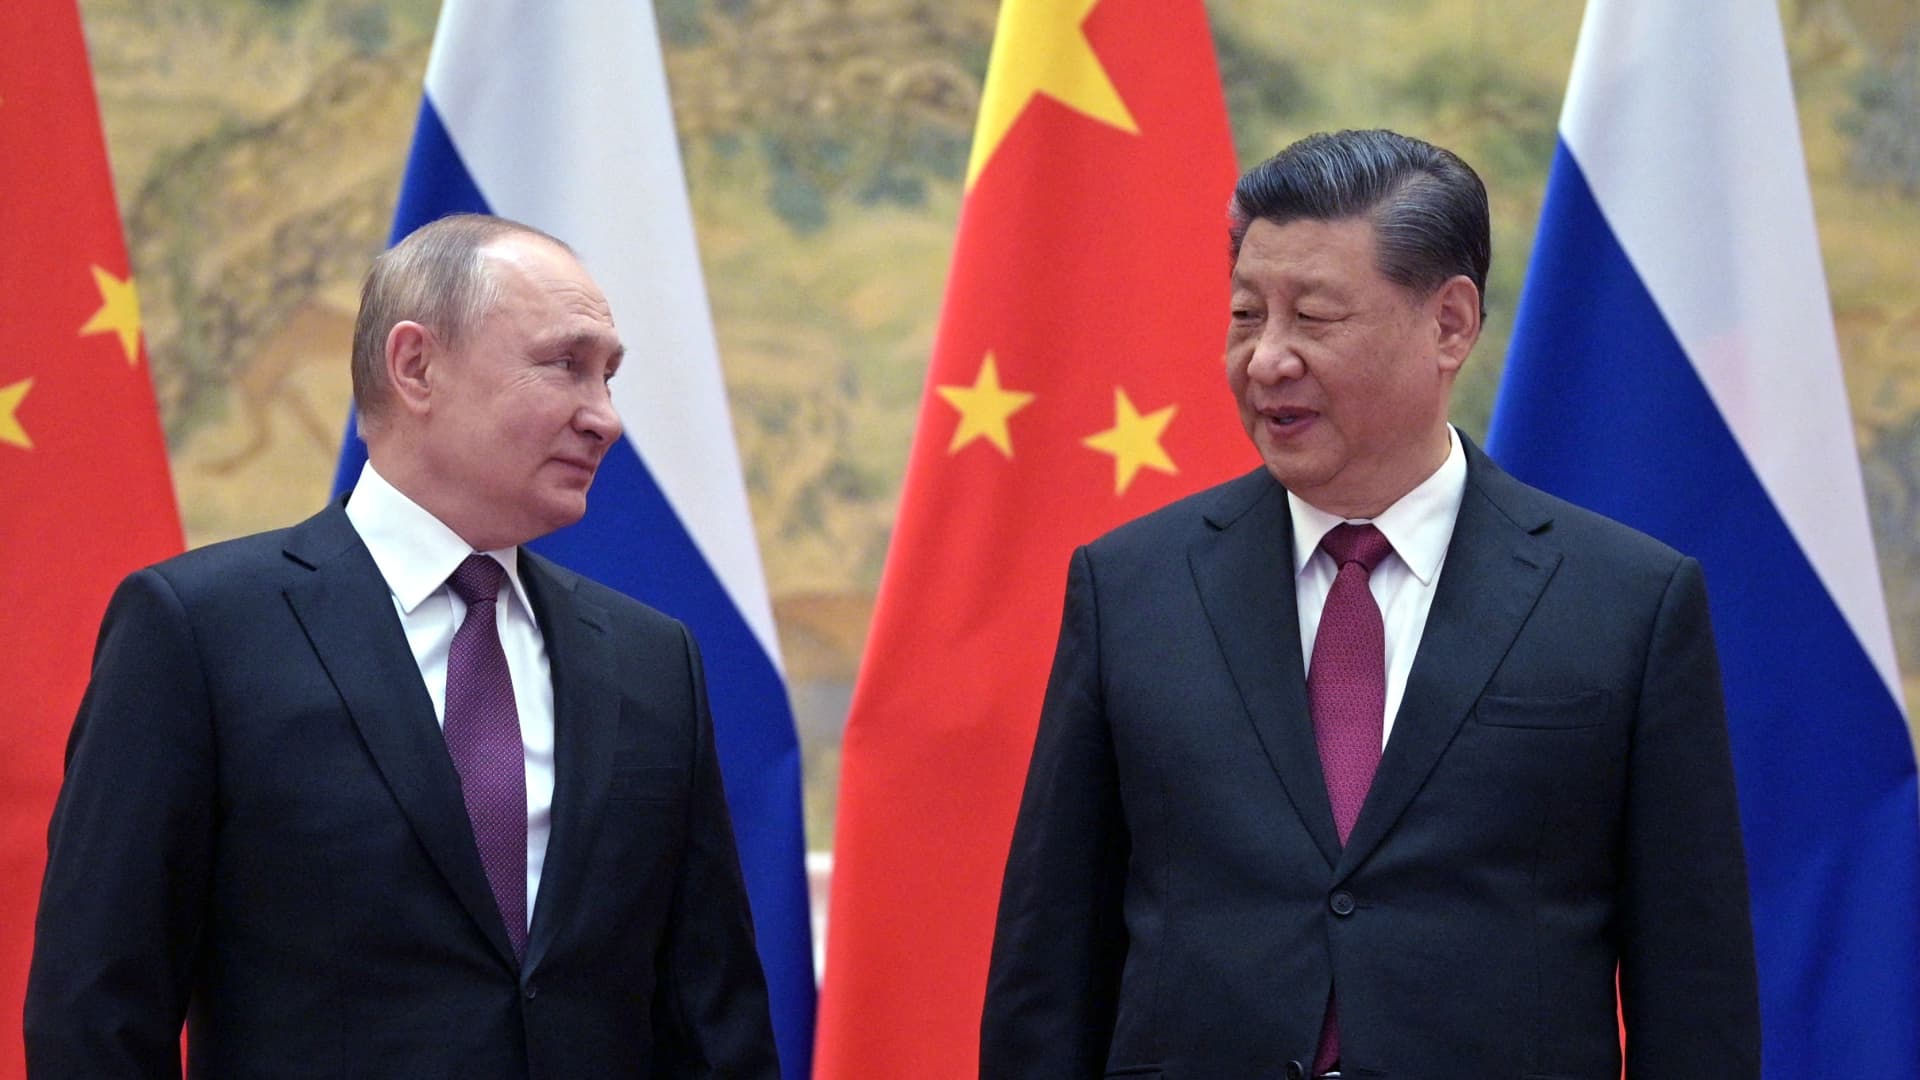 Russia may aspire to a China-style internet, but it's a long way off